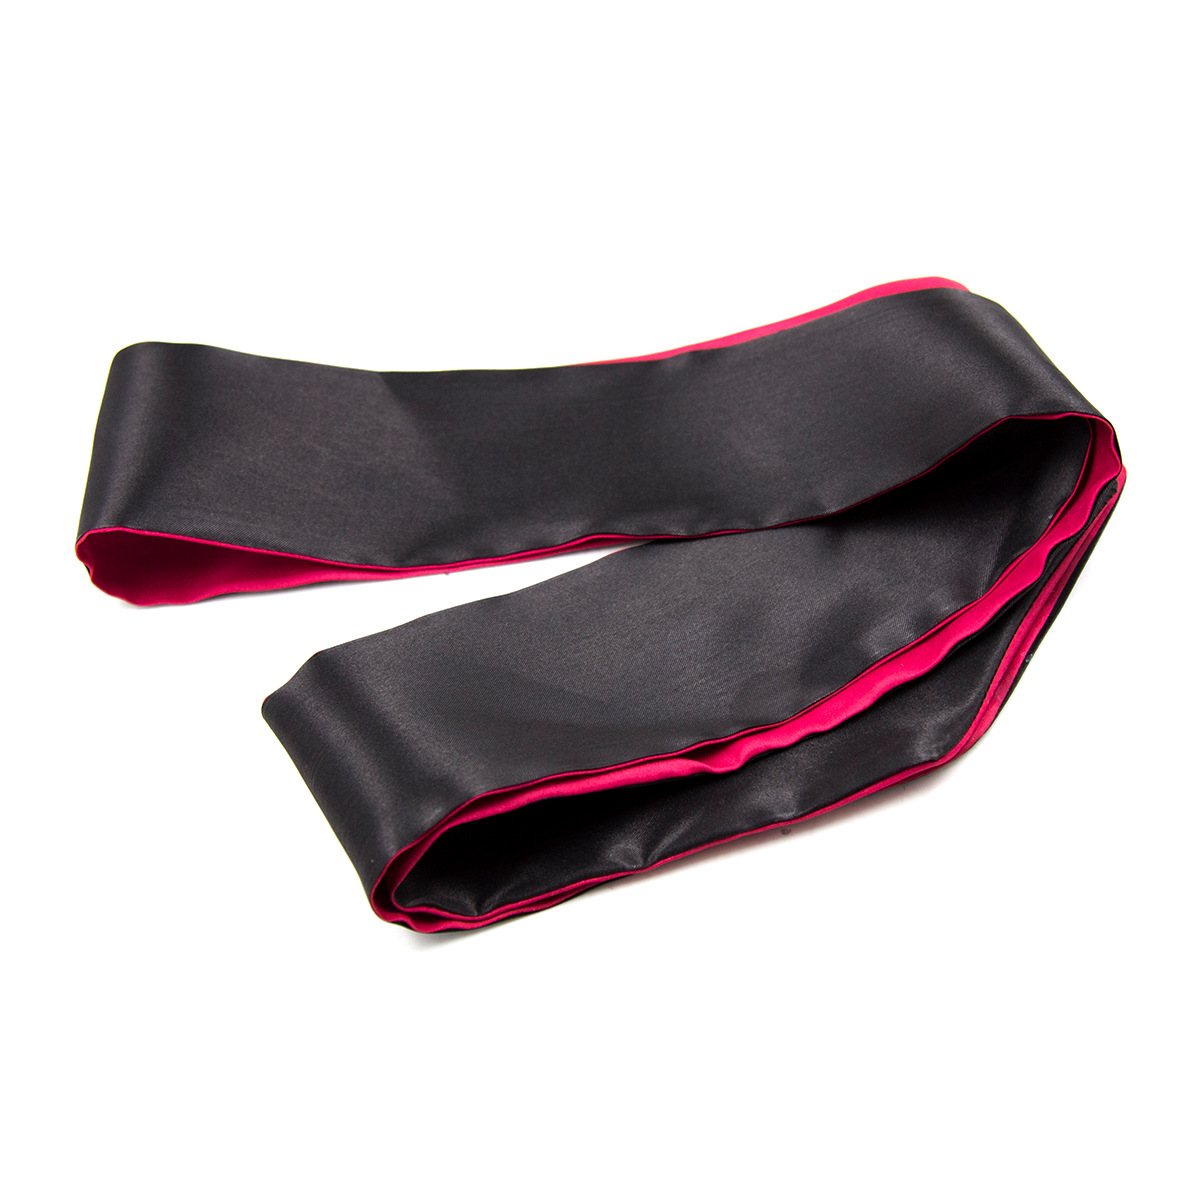 233201055-Simulated silk two-color eye mask, hot selling hand-tied satin red black bondage mask, flirting toy face covering